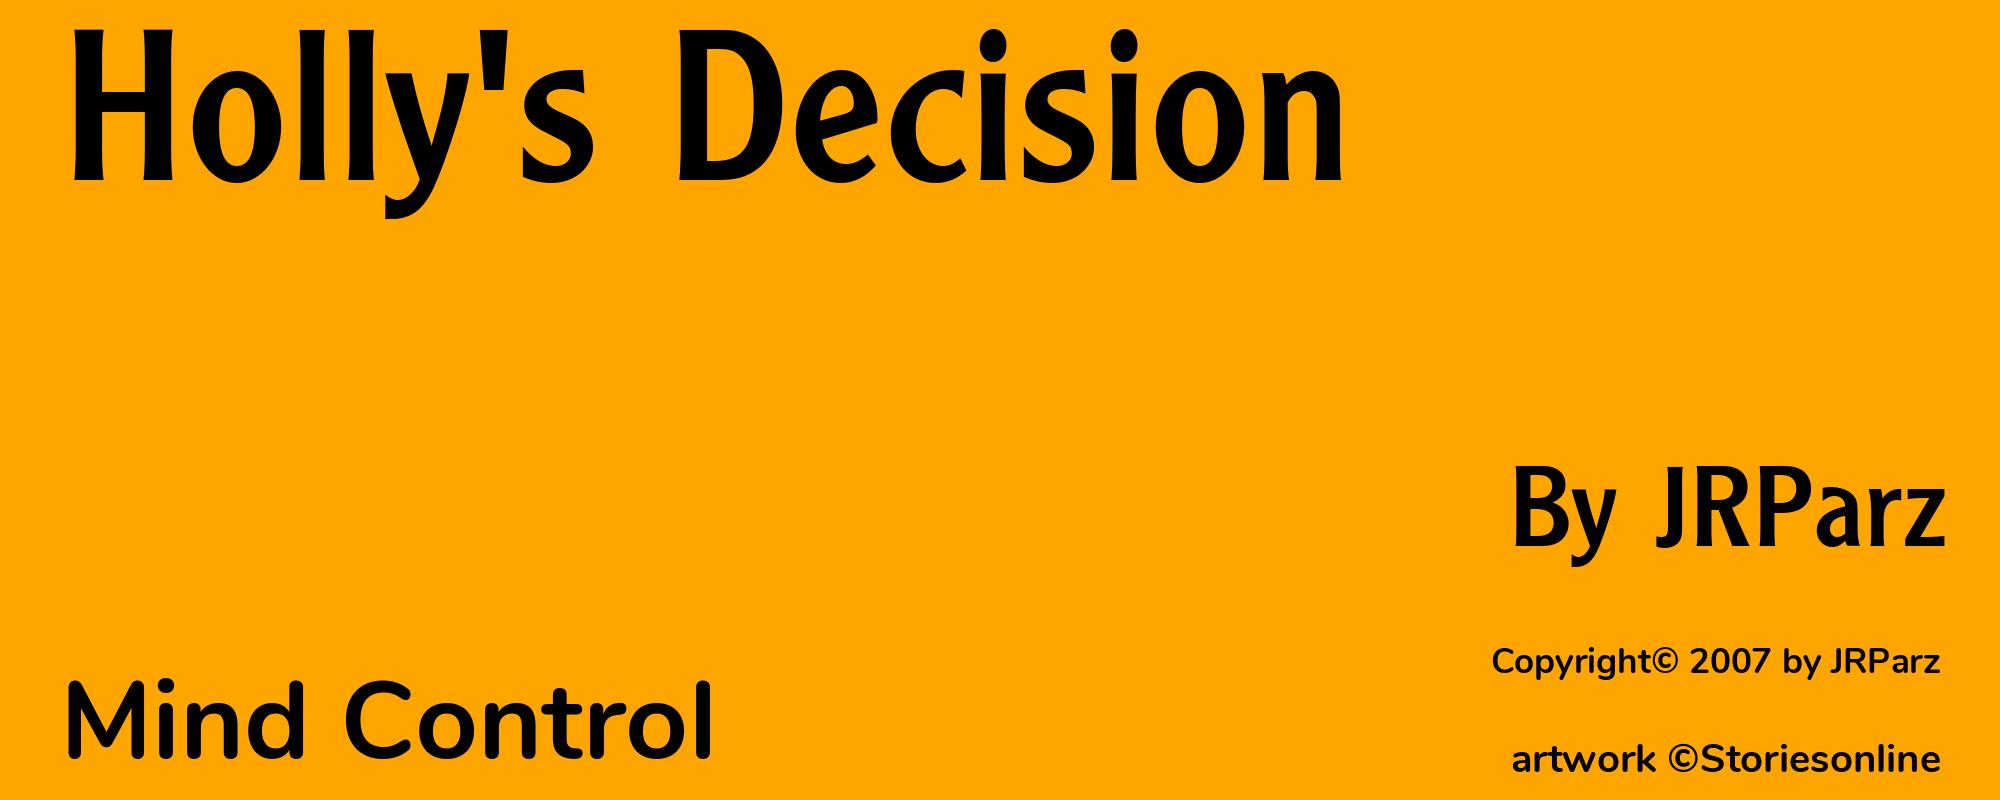 Holly's Decision - Cover